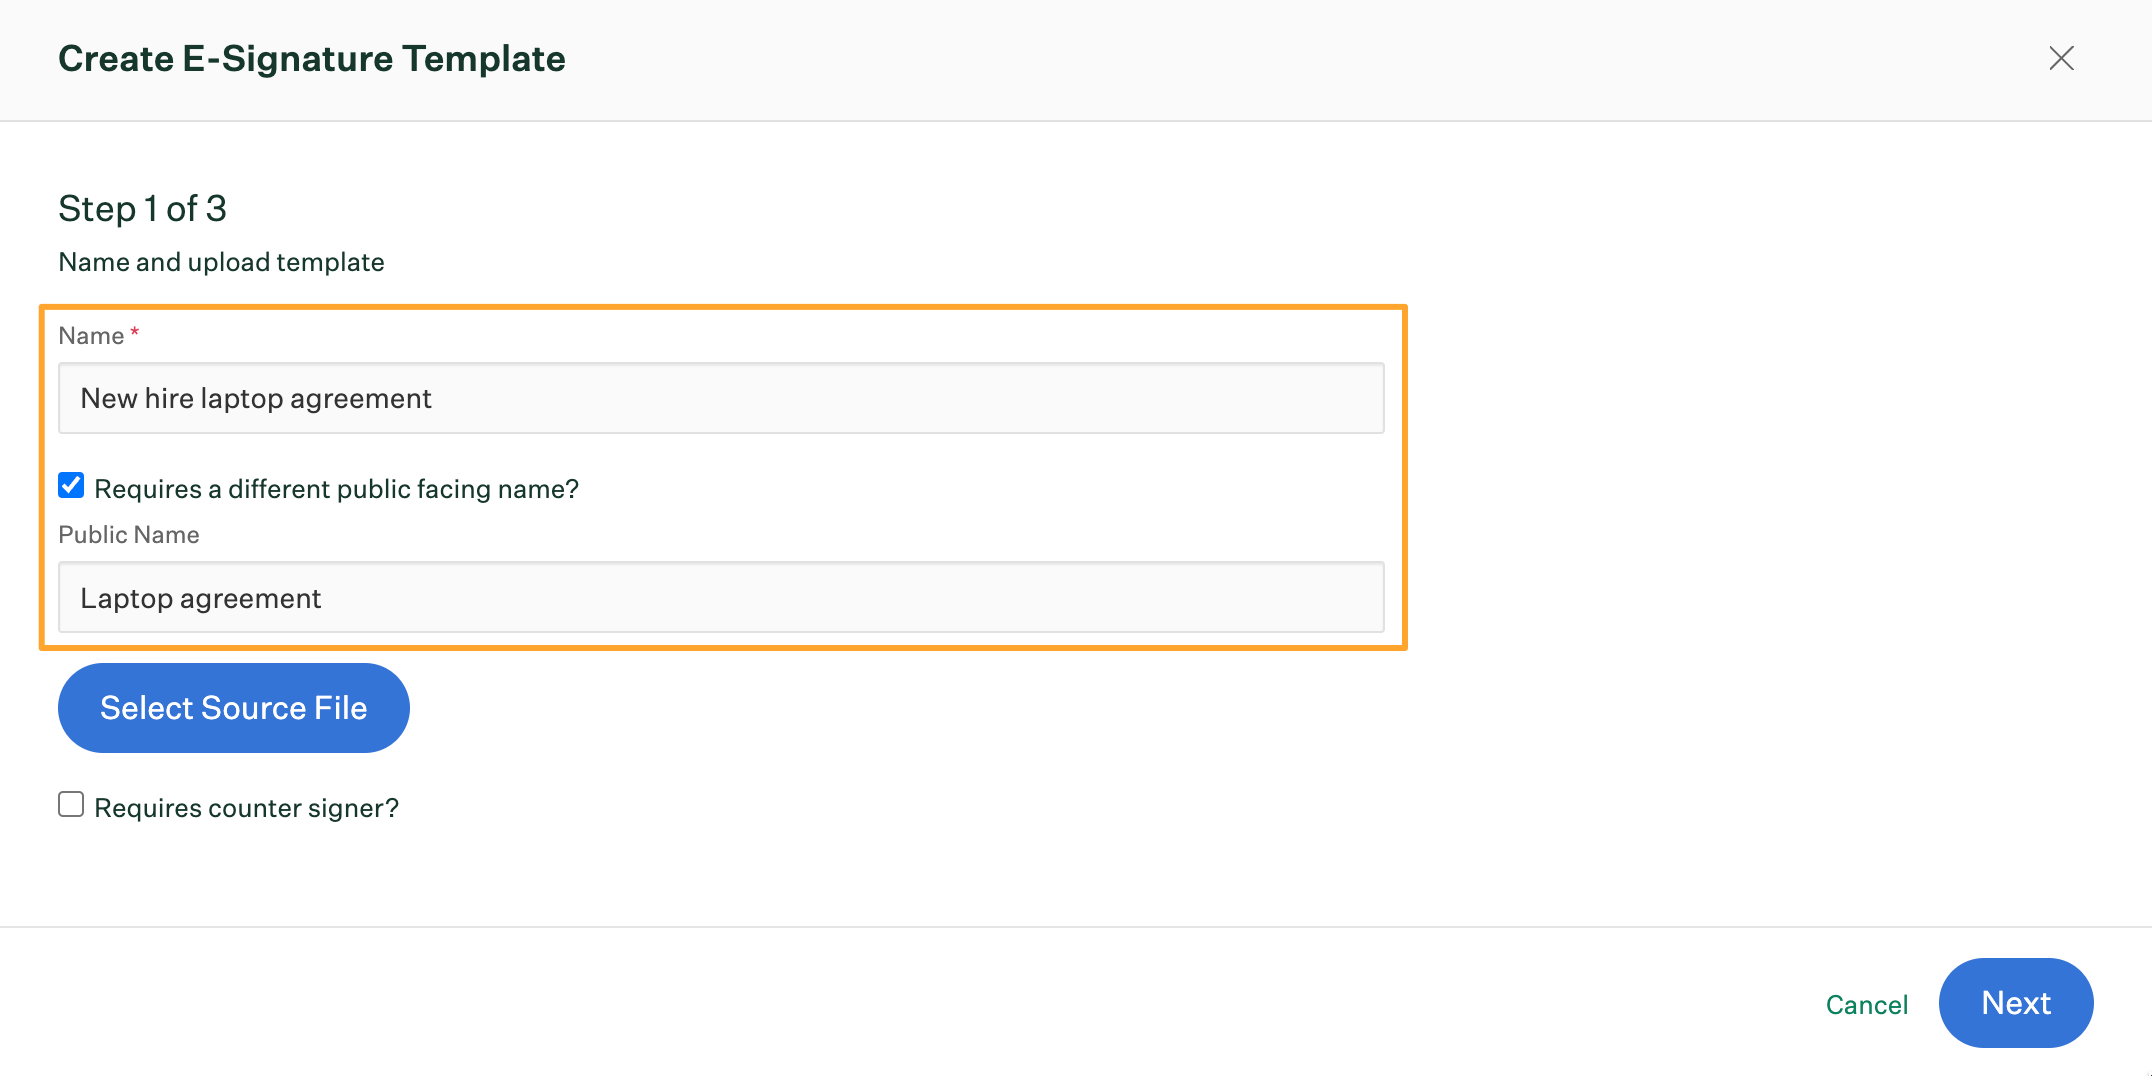 Create E-Signature template dialog box step one with Name and Public Name filled out